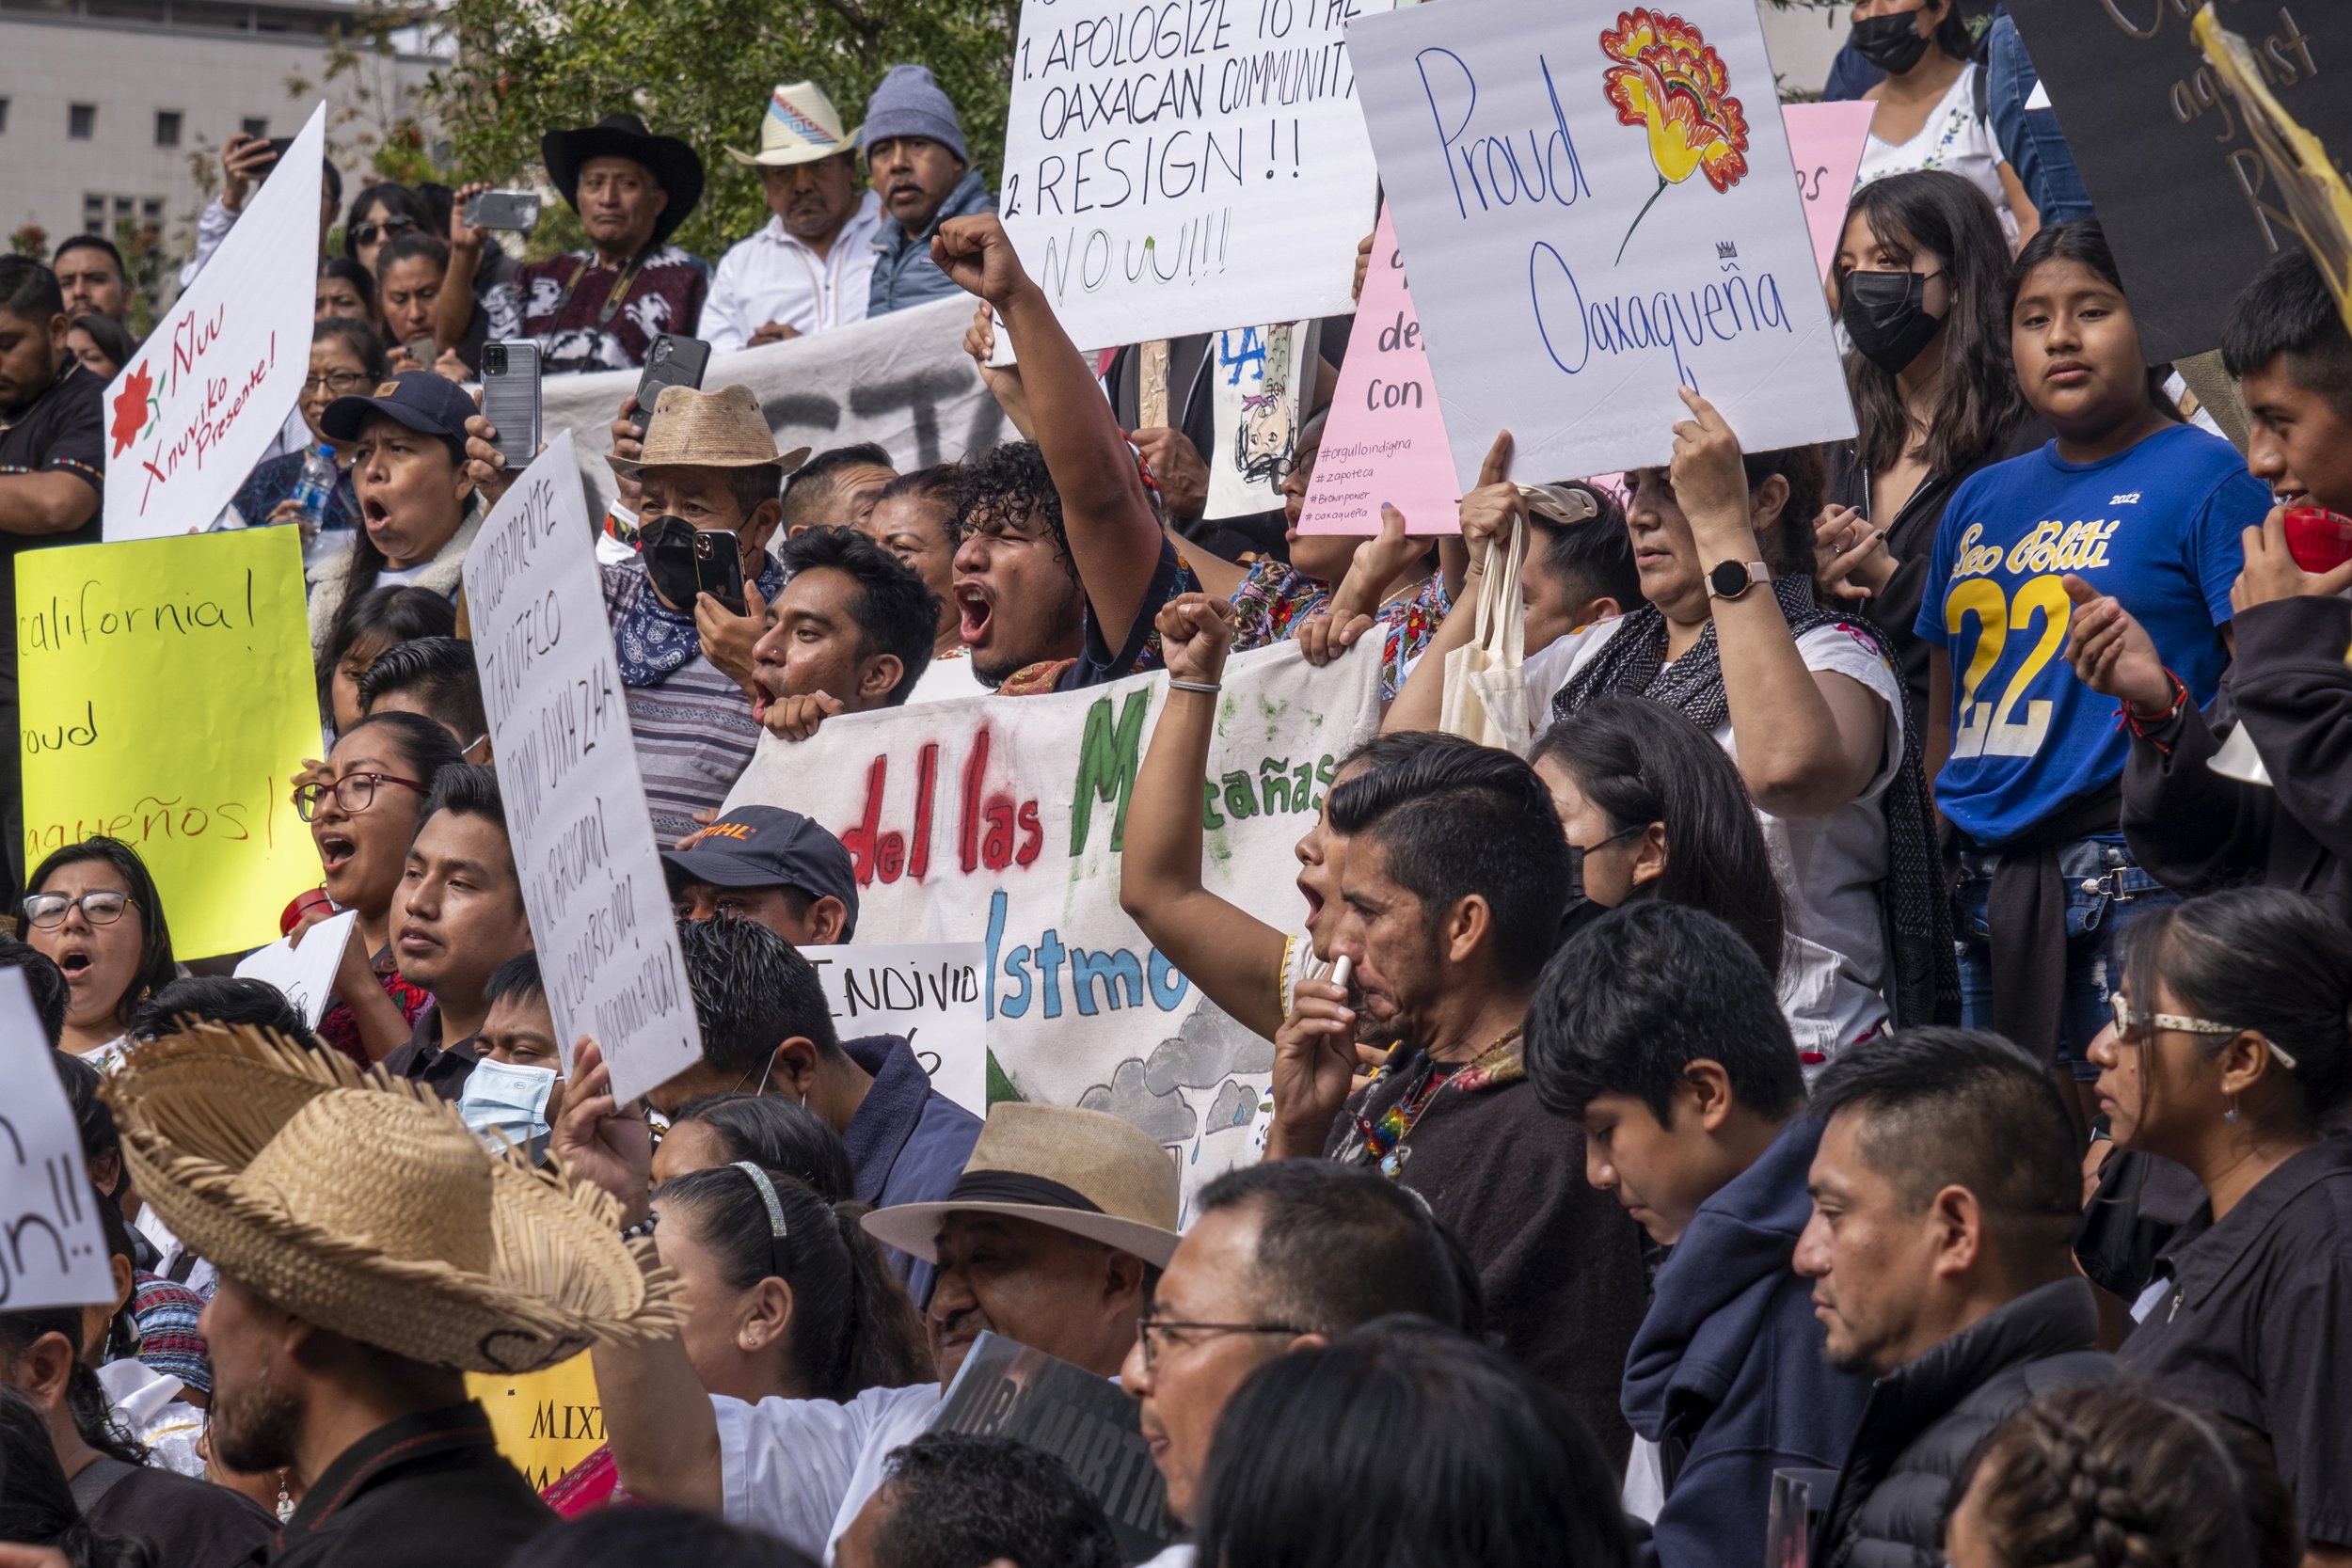  Hundreds of Oaxaca, Zapotec, Mixtec and other indigenous communities gather by City Hall after marching for miles from Los Angeles Trade Technical College. Comunidades Indigenas en Liderazgo (CIELO), which means Indigenous Communities in Leadership,